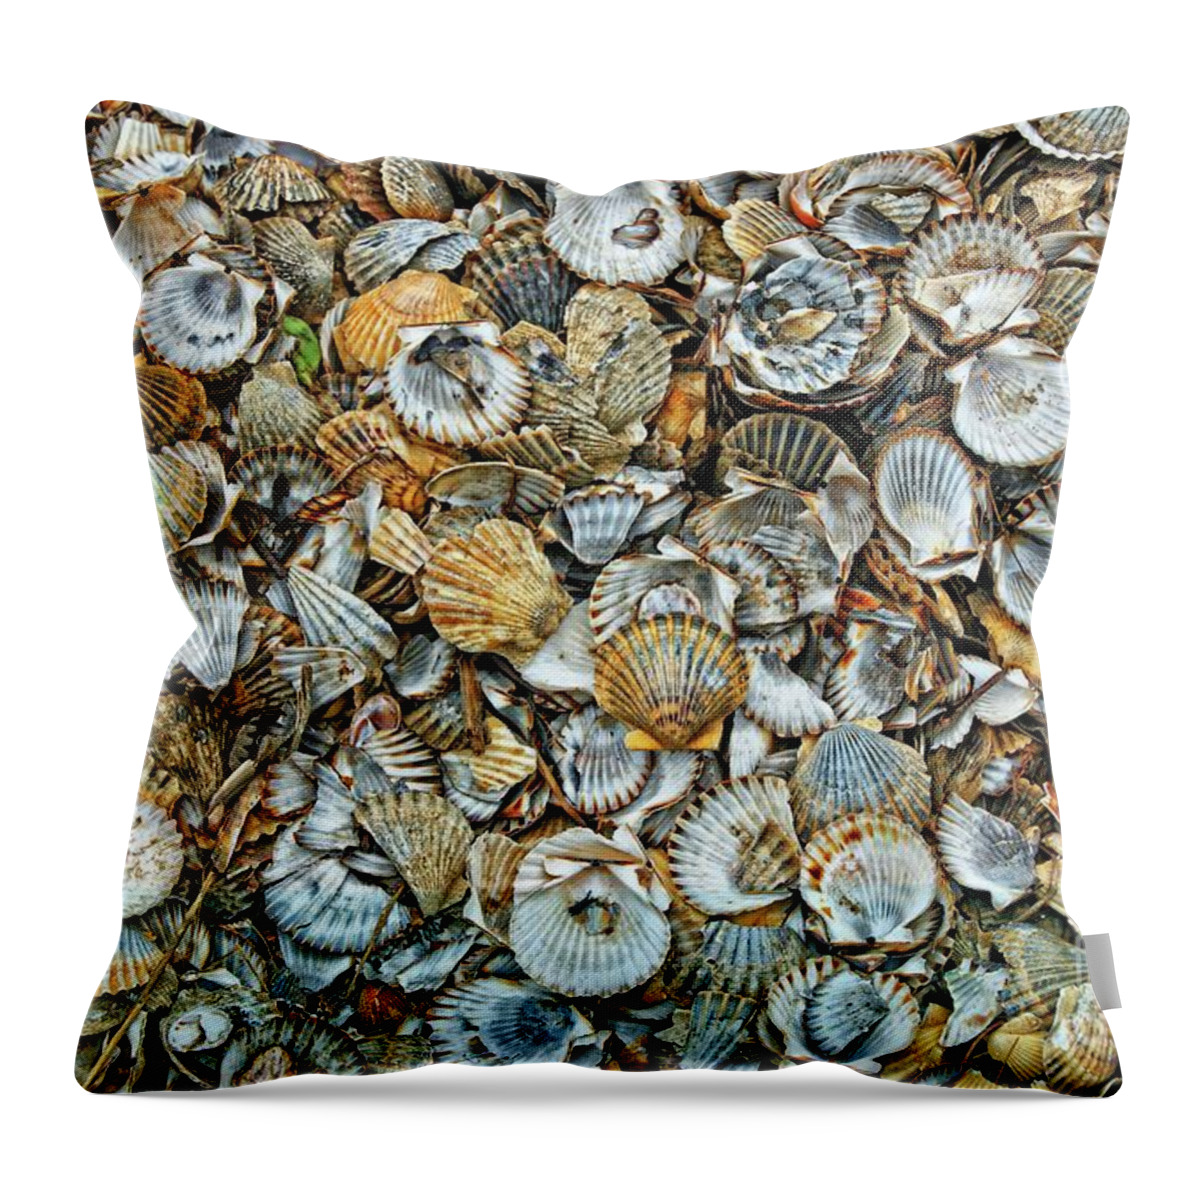 Sea Throw Pillow featuring the photograph Sea Shells by David Birchall